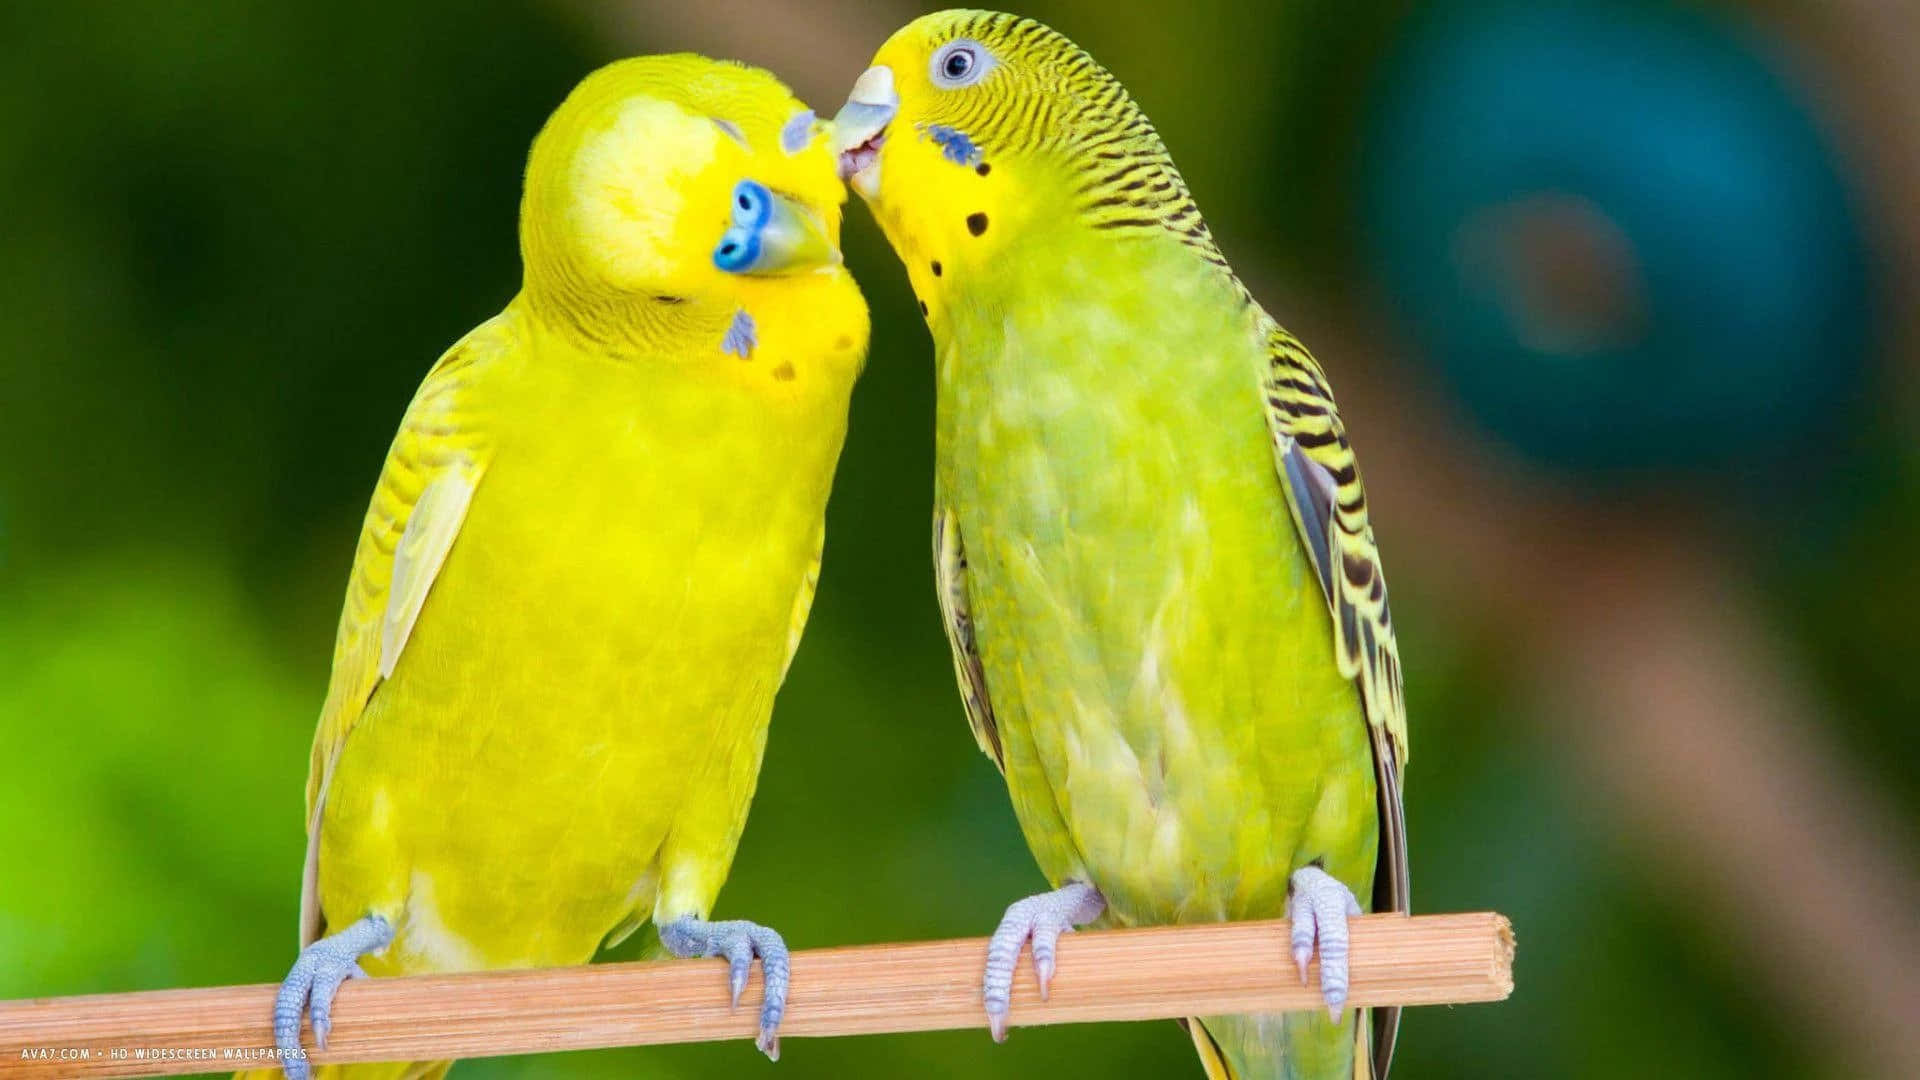 most beautiful images of love birds